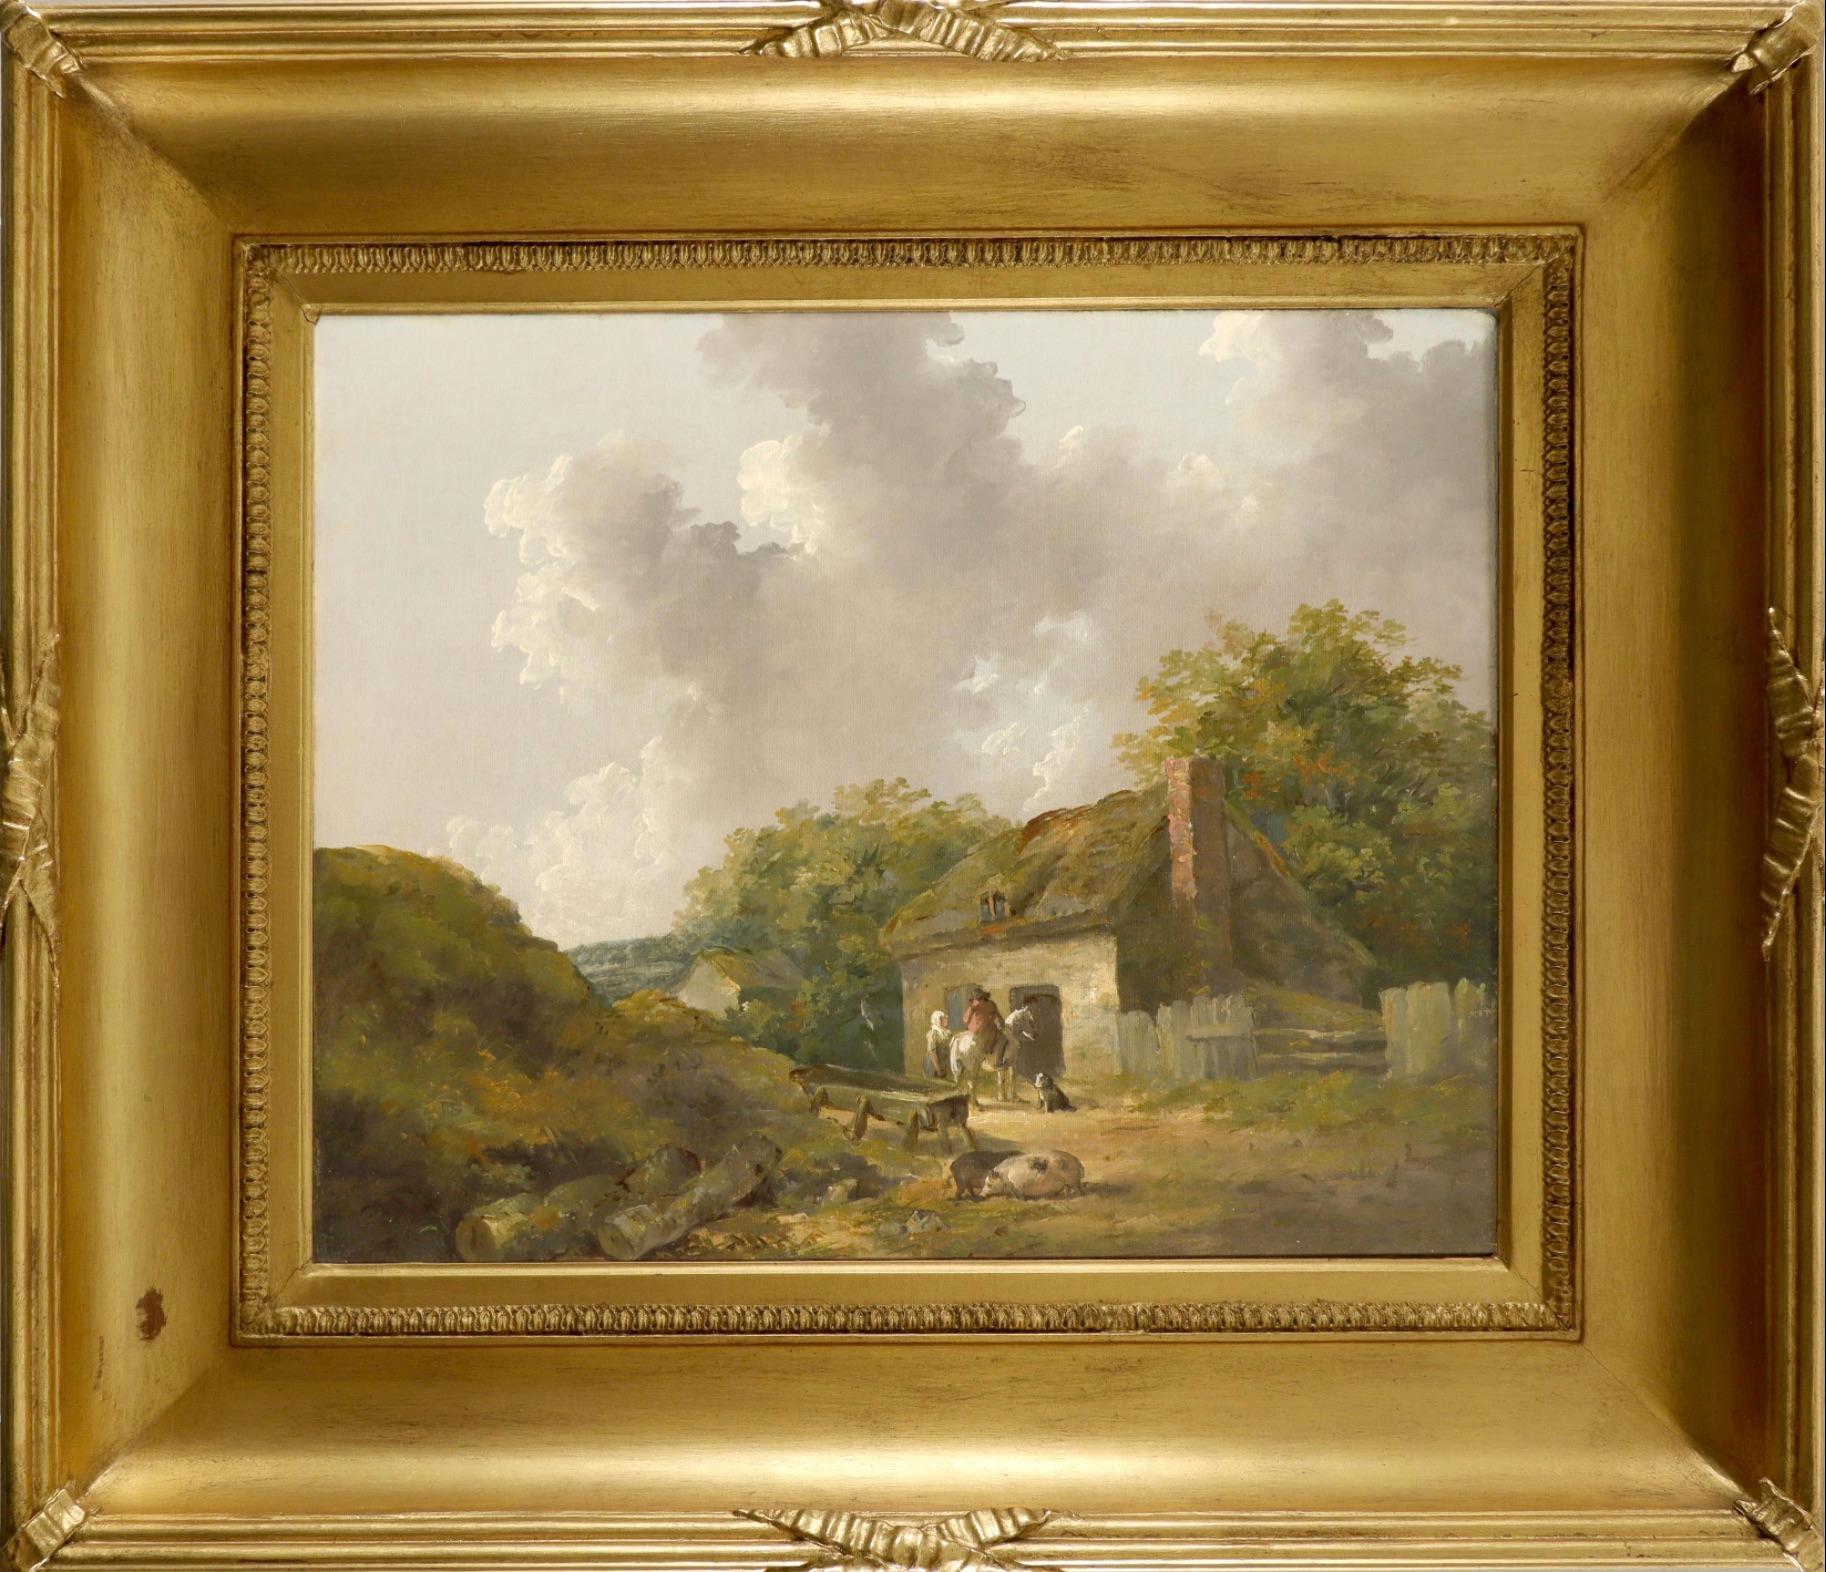 Thomas Hand Landscape Painting - 'Summer' - A group of figures outside an inn, in a landscape